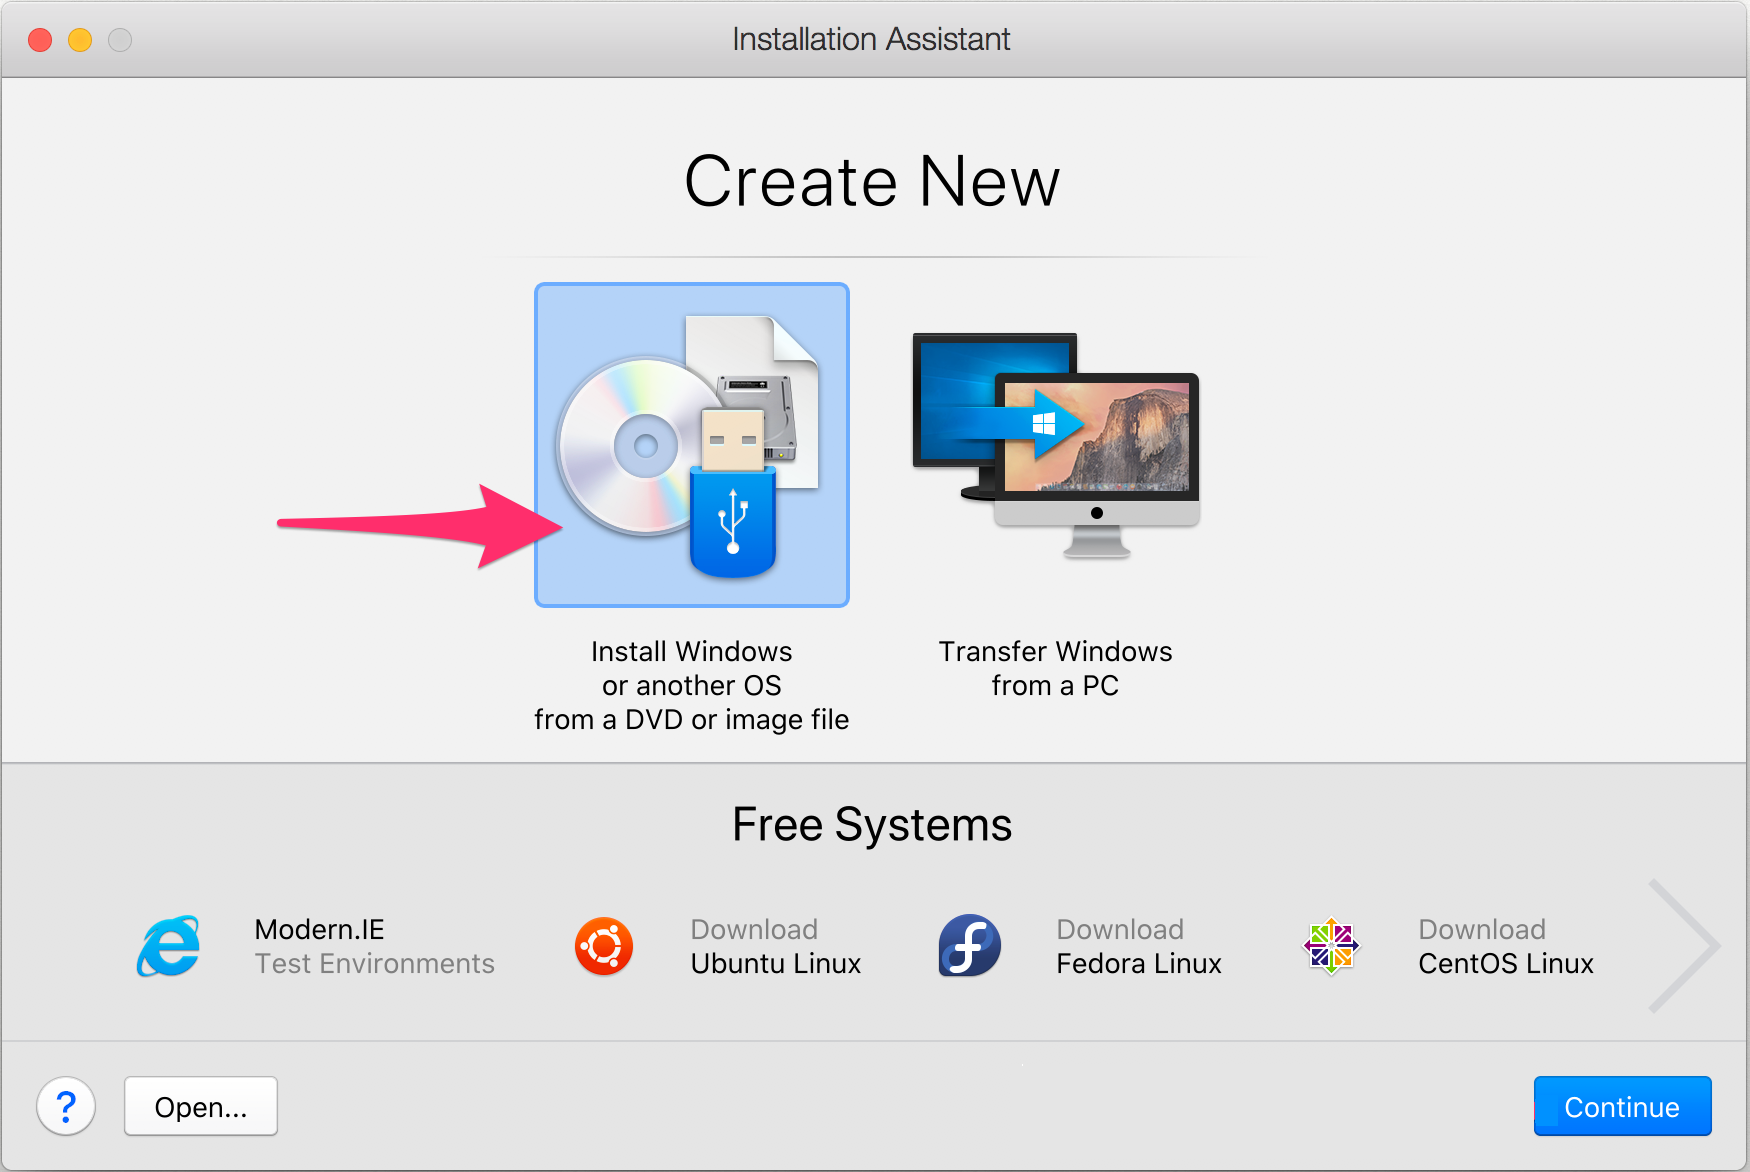 Create New screen, Install Windows or another OS from a DVD or image file message